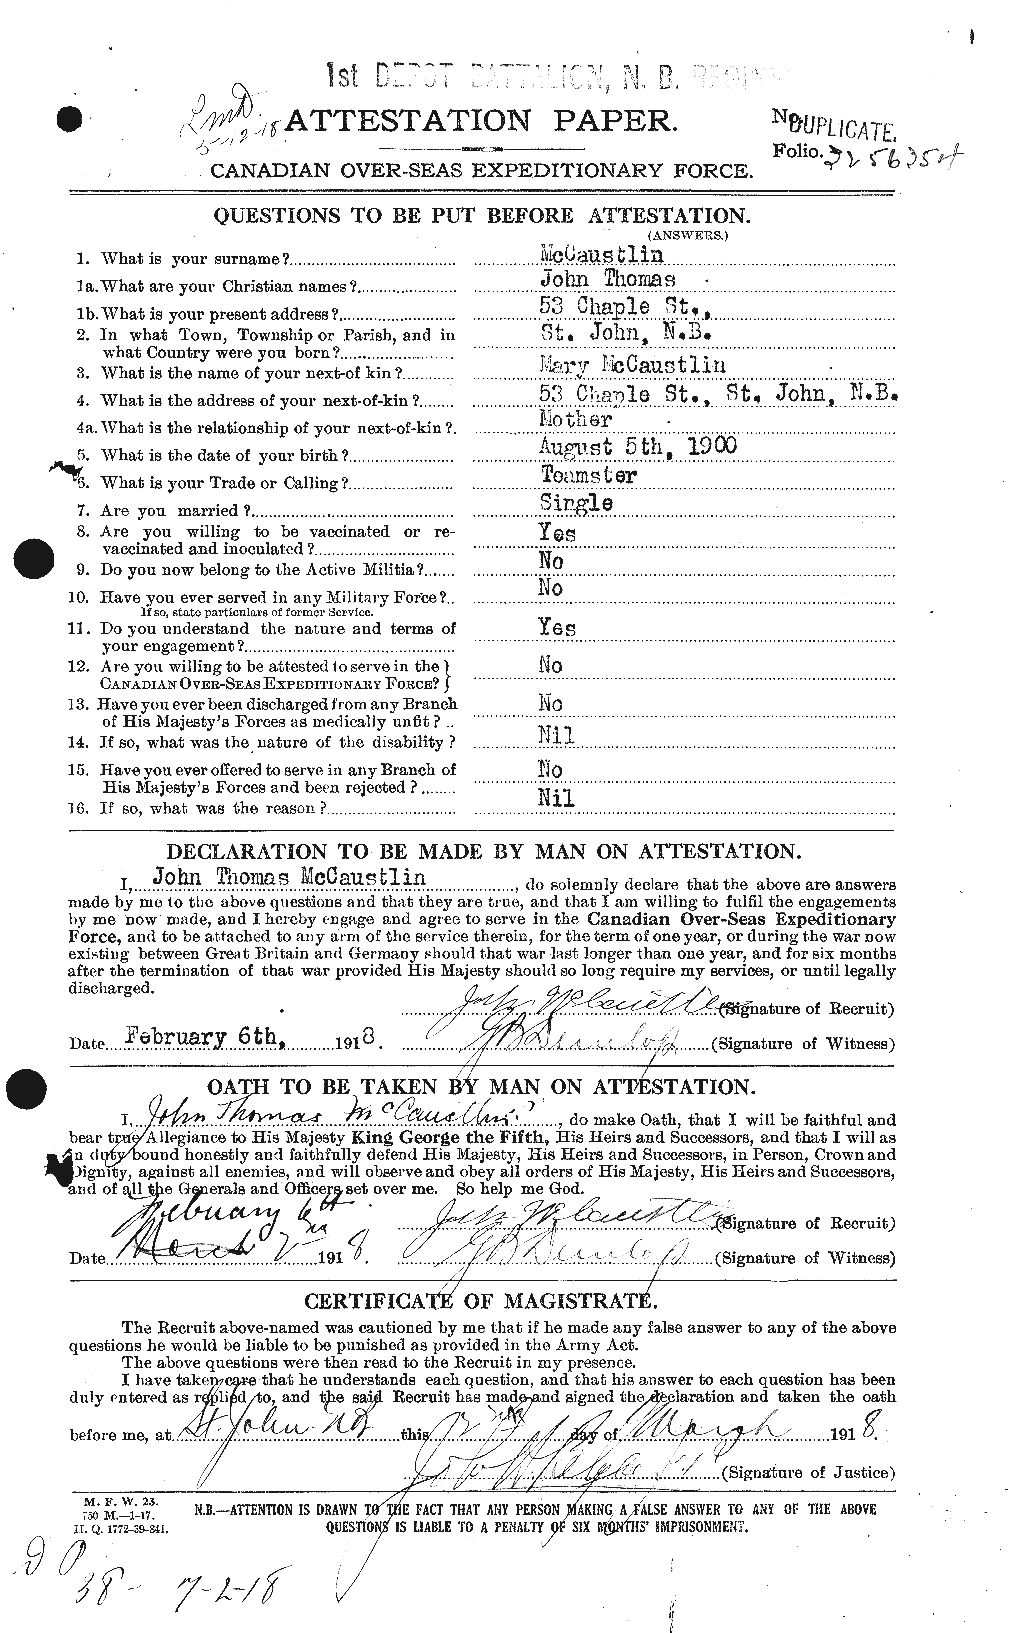 Personnel Records of the First World War - CEF 132566a